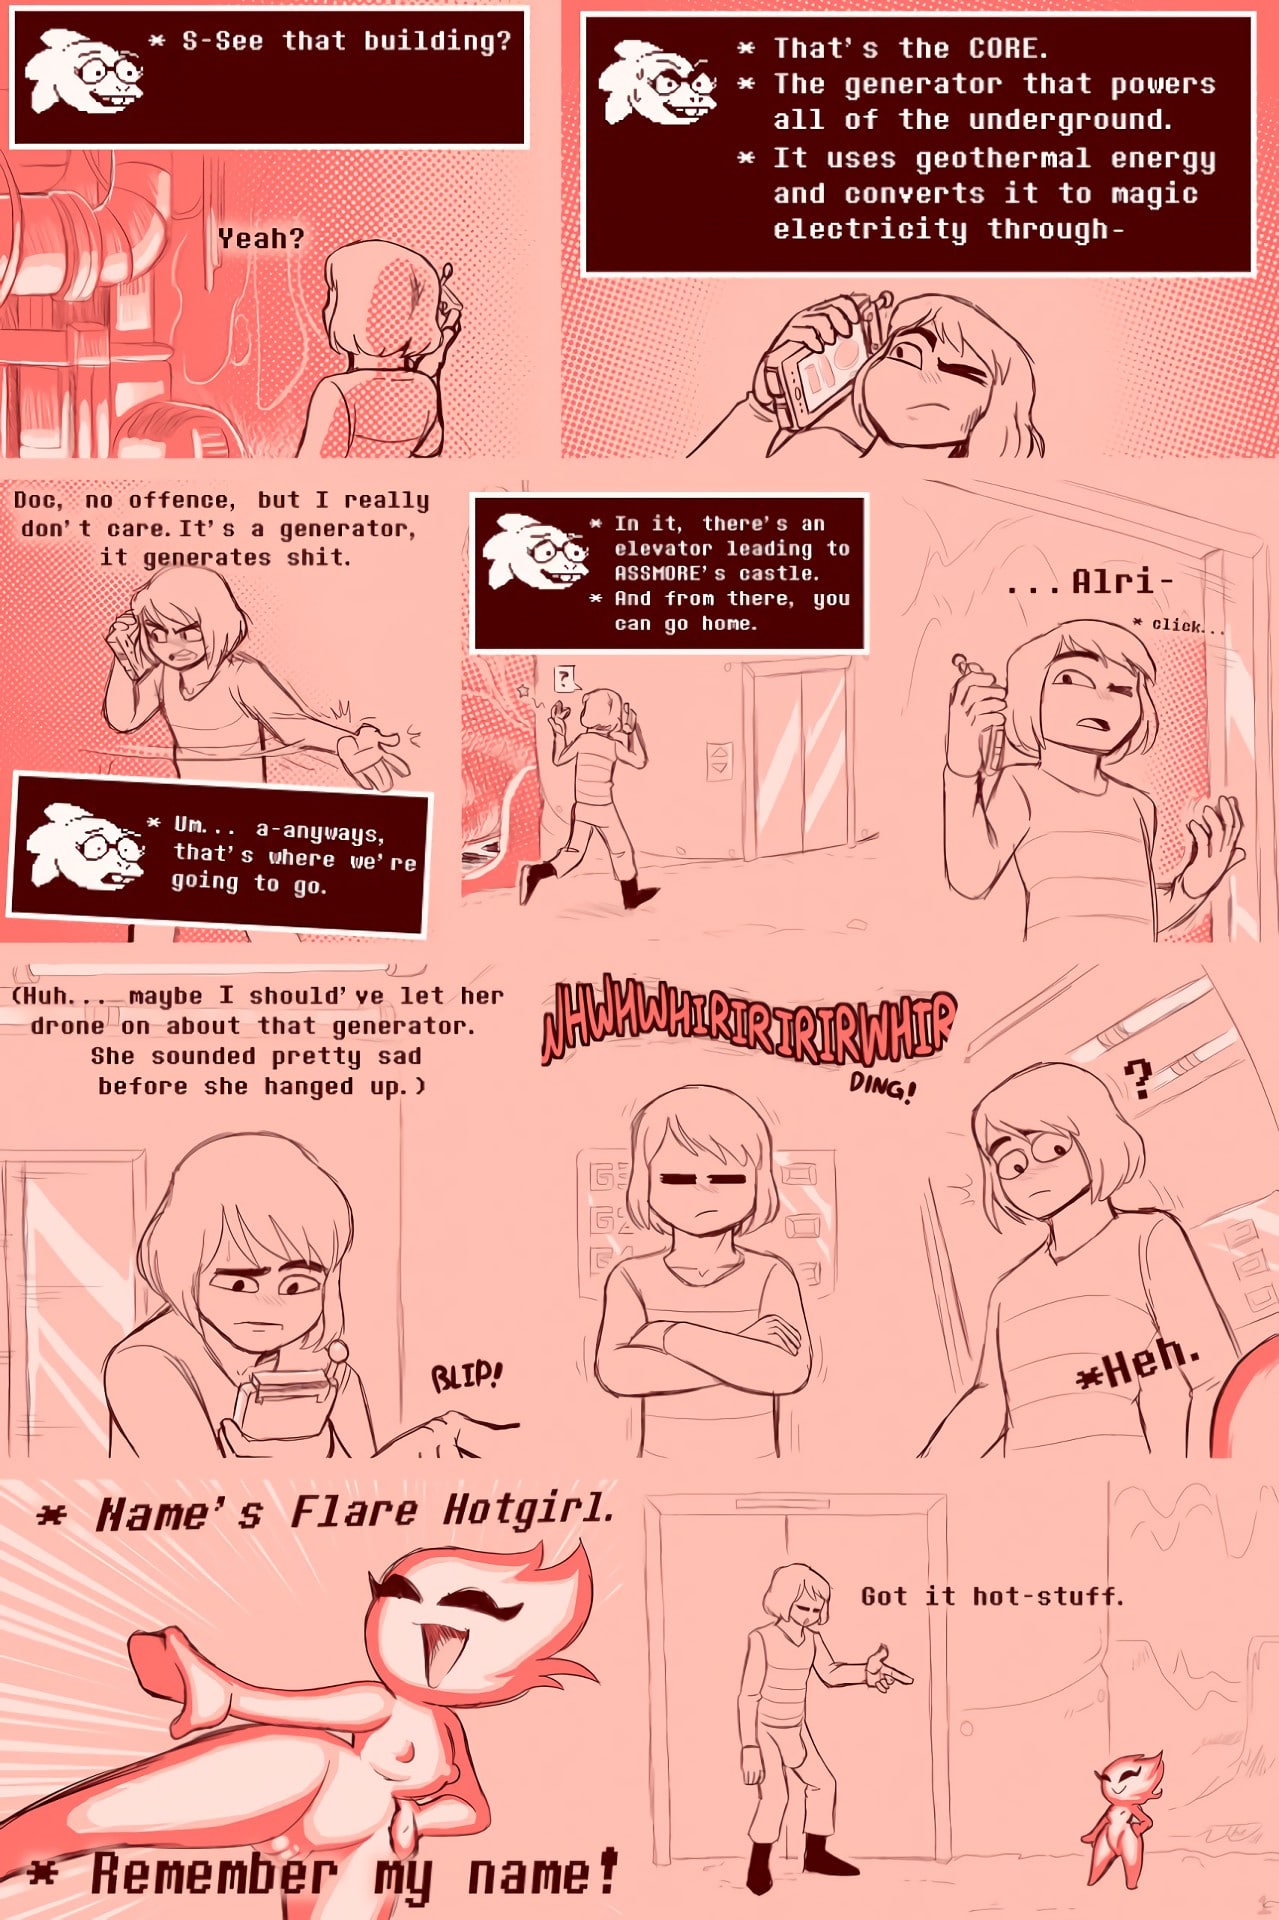 Majic Porn Undertale - Under(her)tail Monster-GirlEdition 5 Porn Comics by [TheWill] (Undertale)  Rule 34 Comics â€“ R34Porn